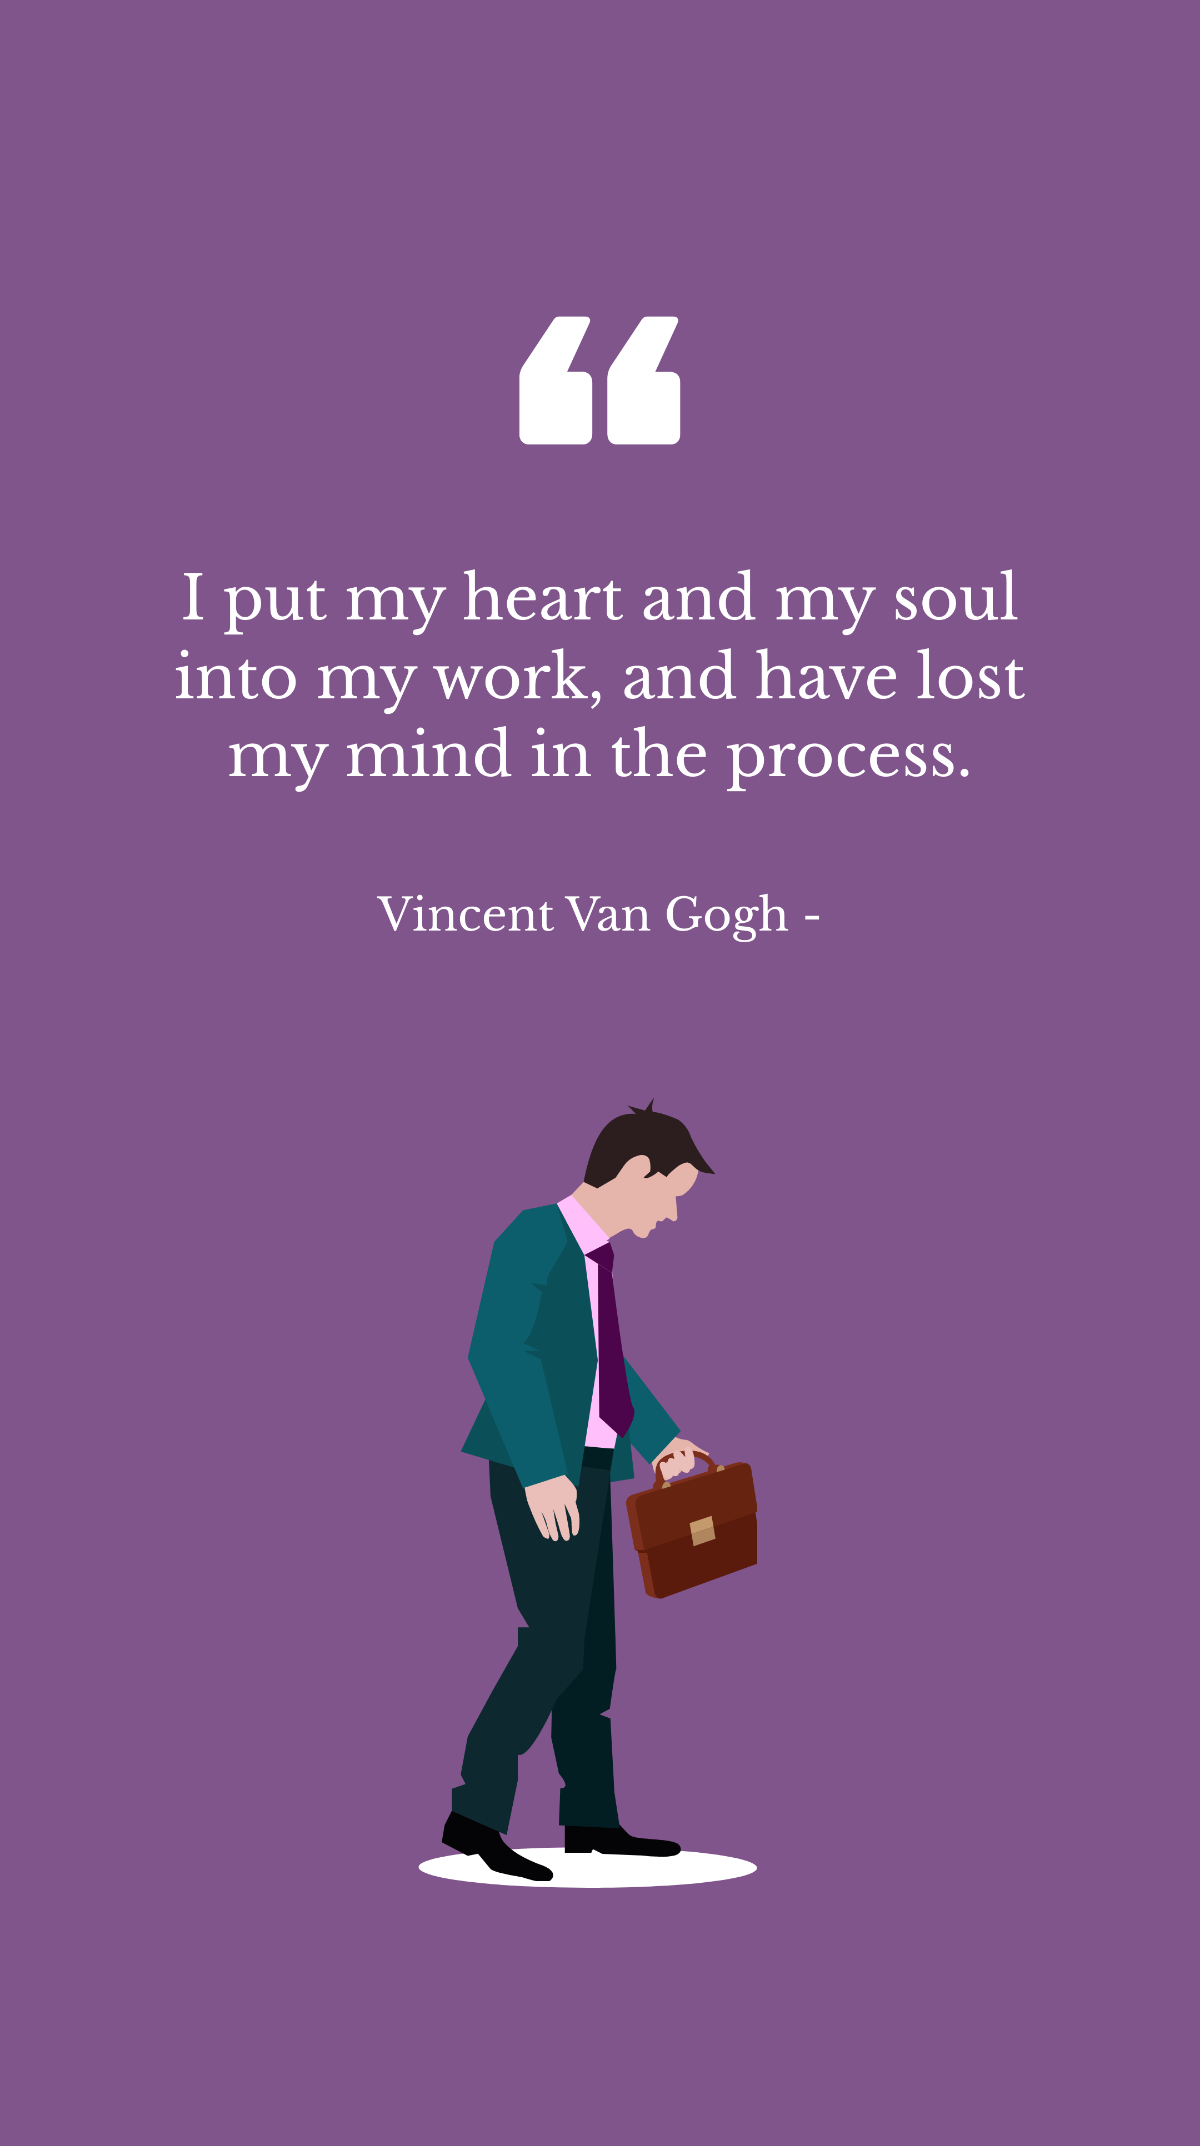 Vincent Van Gogh - I put my heart and my soul into my work, and have lost my mind in the process. Template